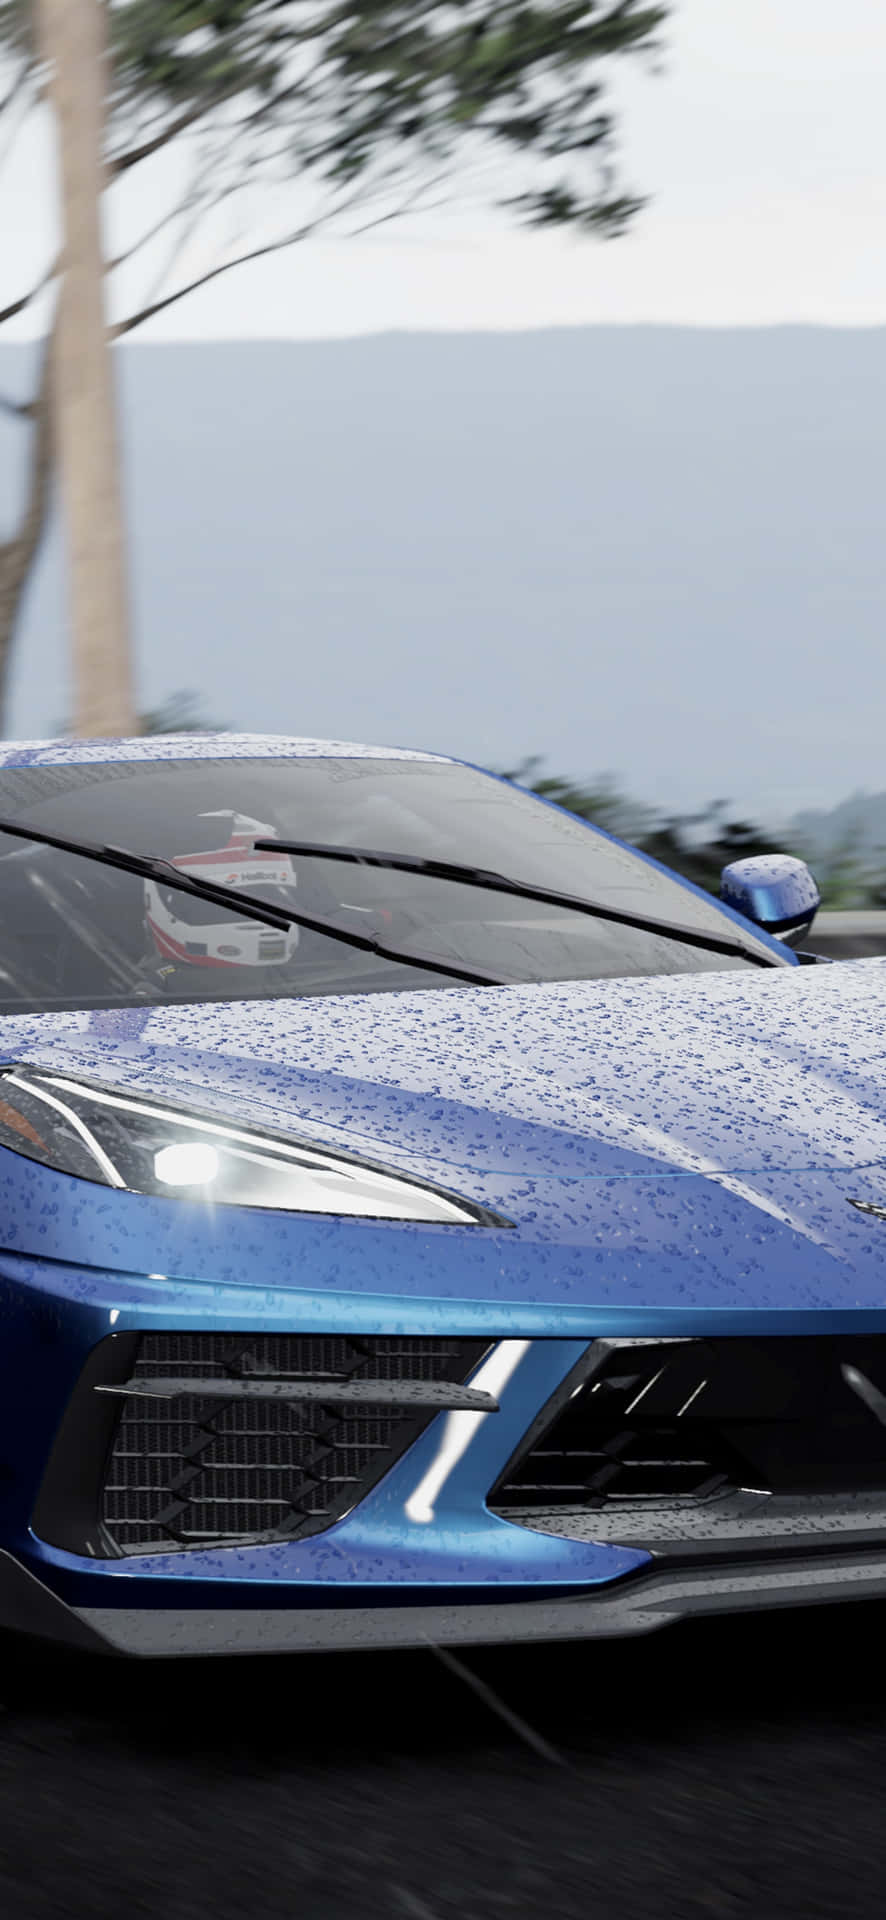 A colourful and exhilarating shot from the world-renowned racing game, Project Cars 2.